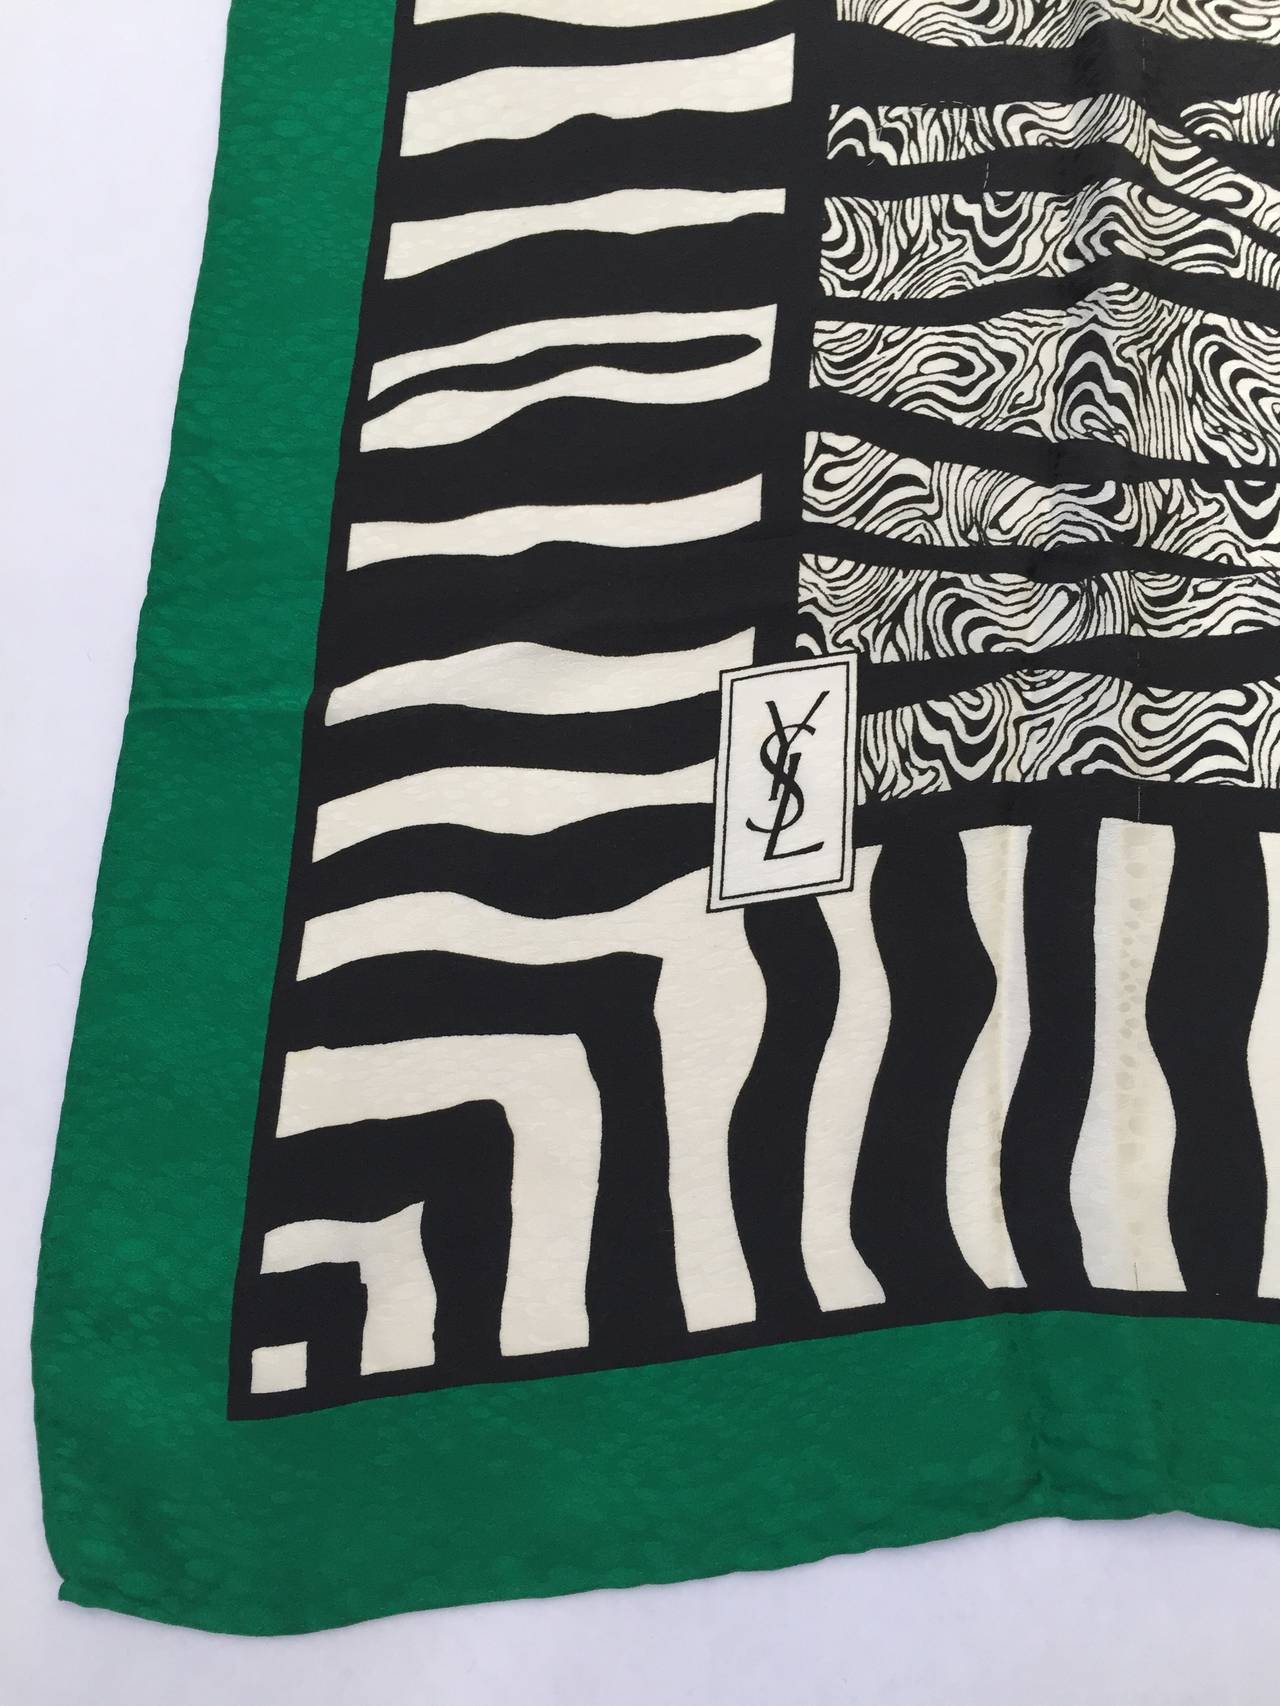 Yves Saint Laurent 80s zebra print silk scarf with green trim and hand rolled edges. 
34